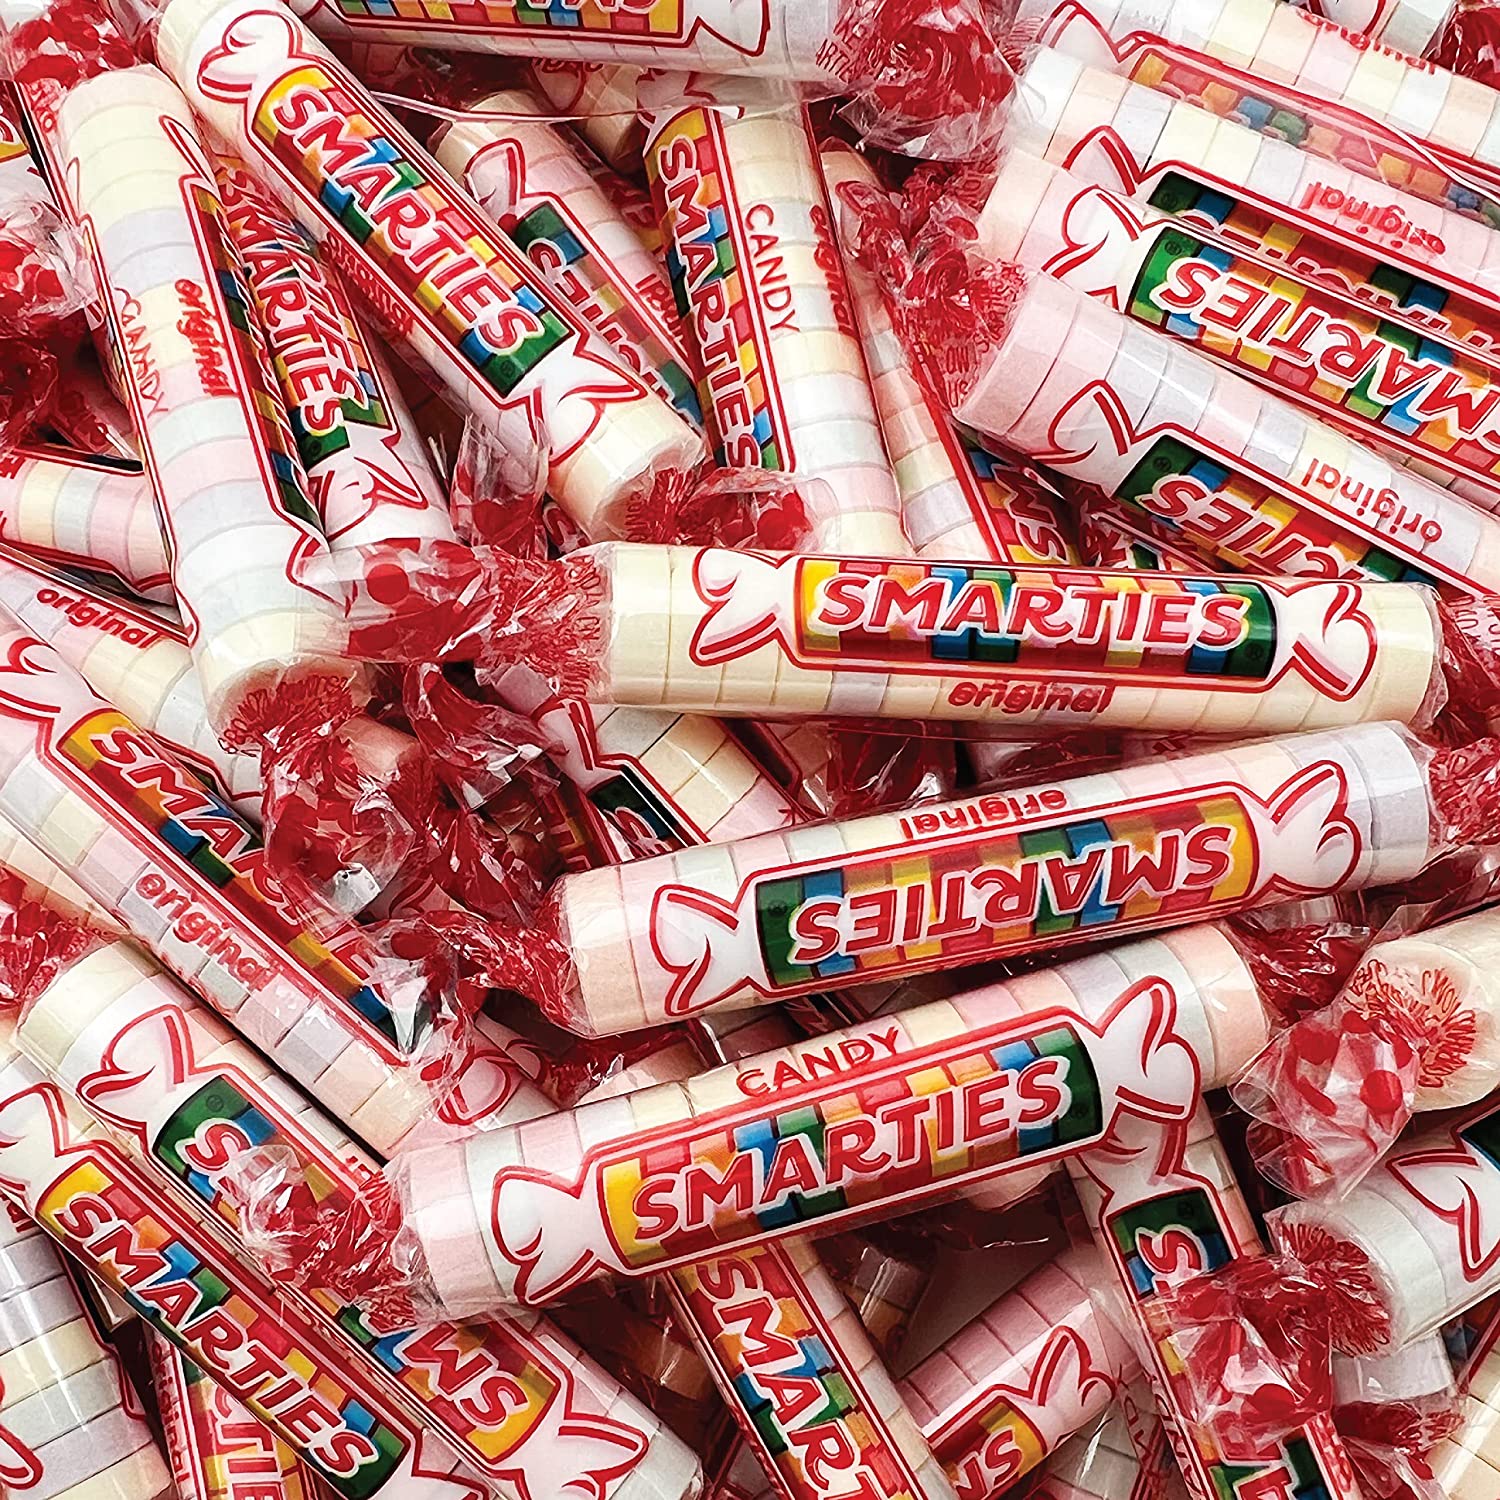 Small, inexpensive thing: Smarties